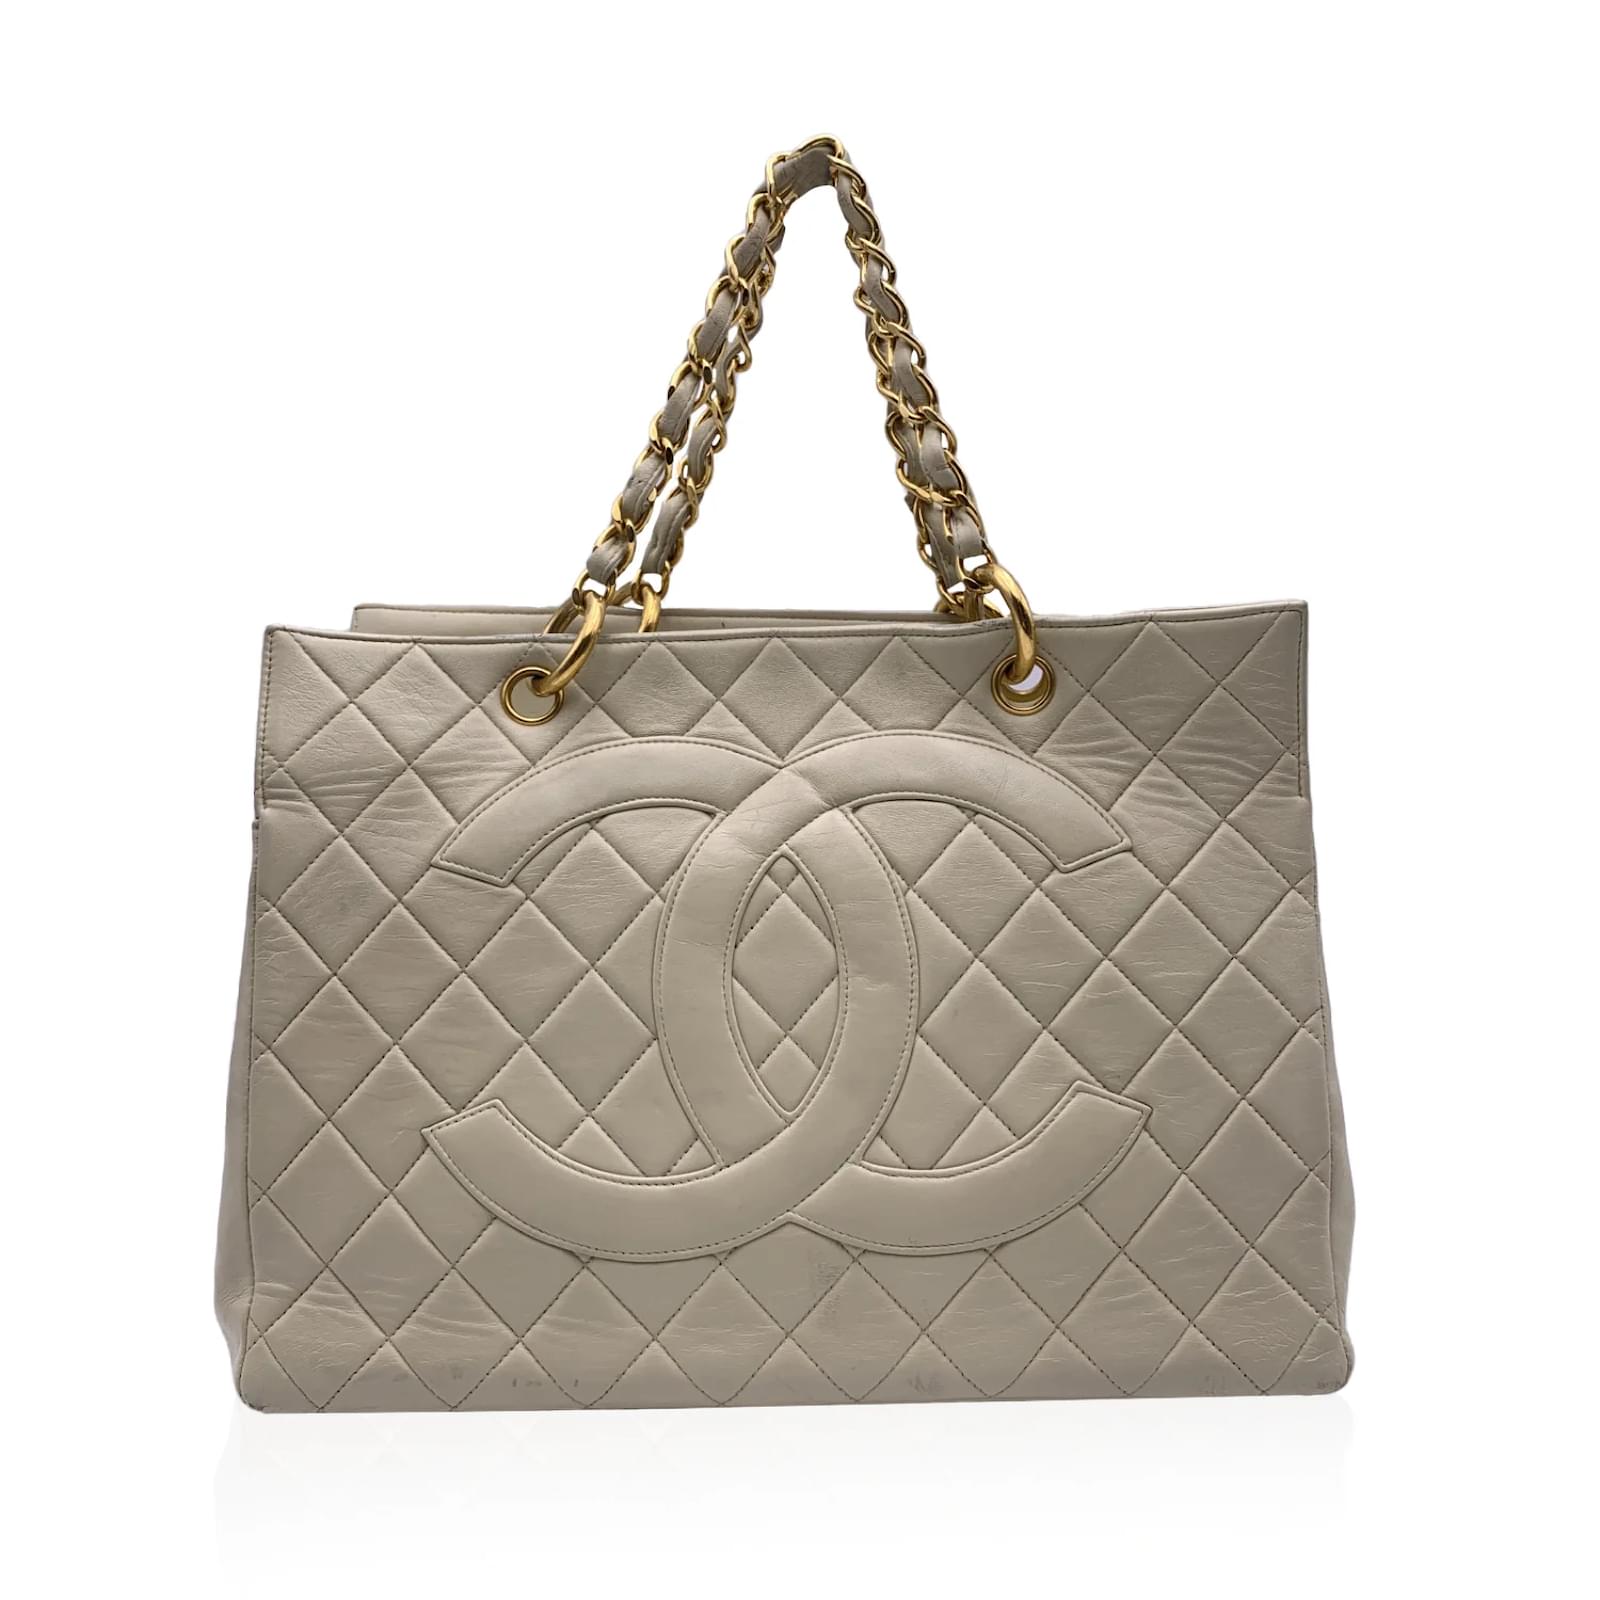 Totes Chanel Vintage Beige Quilted Leather GST 1997 Grand Shopping Tote